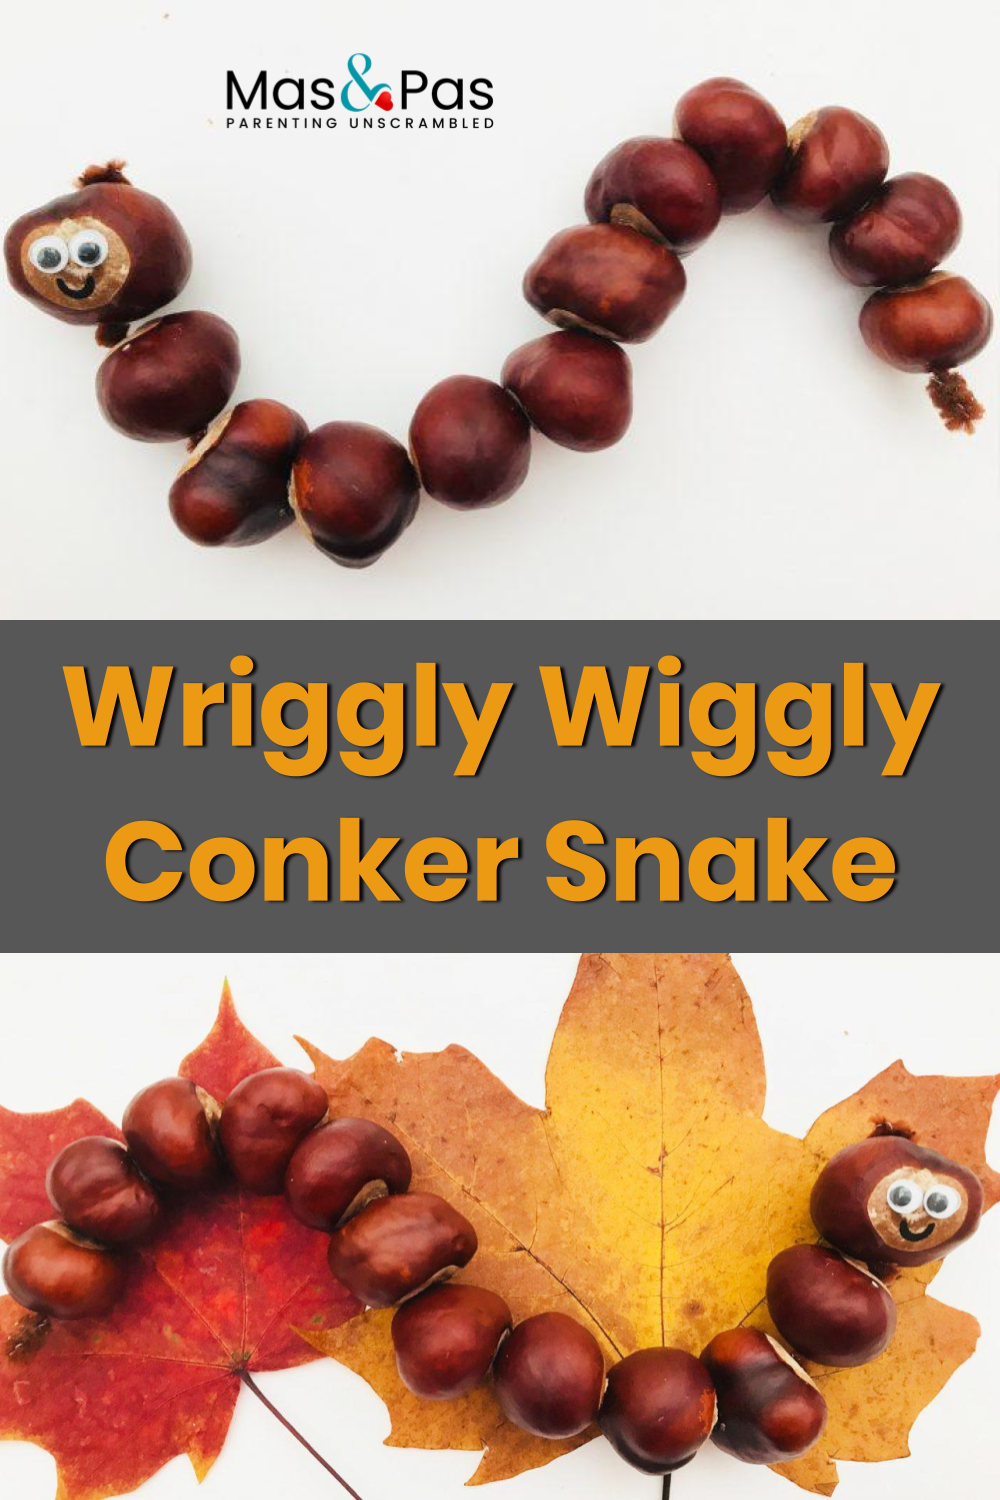 Wriggly wiggly conker snake - Wriggly wiggly conker snake -   19 diy Kids autumn ideas